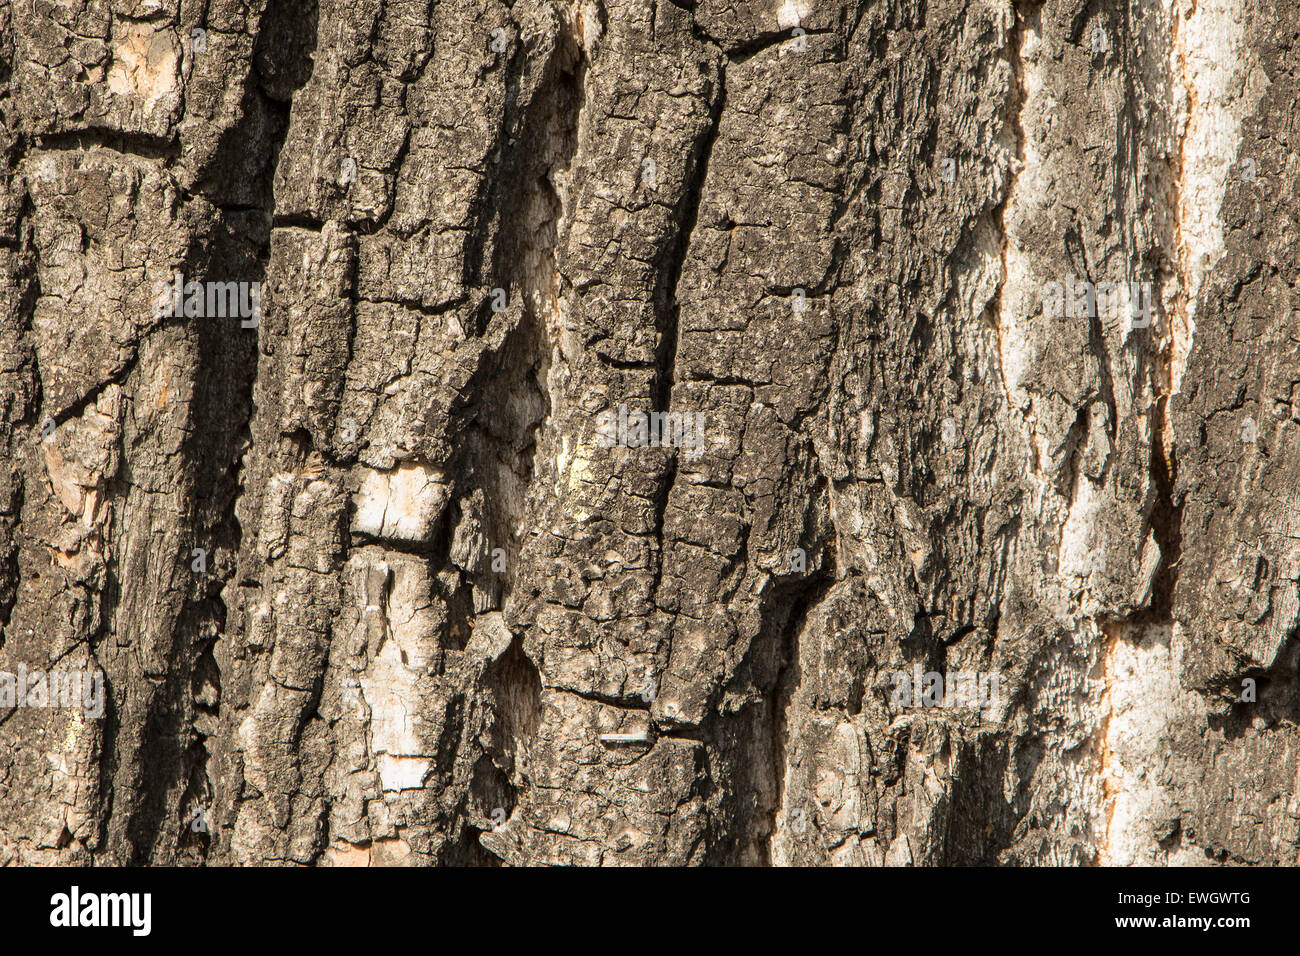 Background or texture of bark of tree. Stock Photo